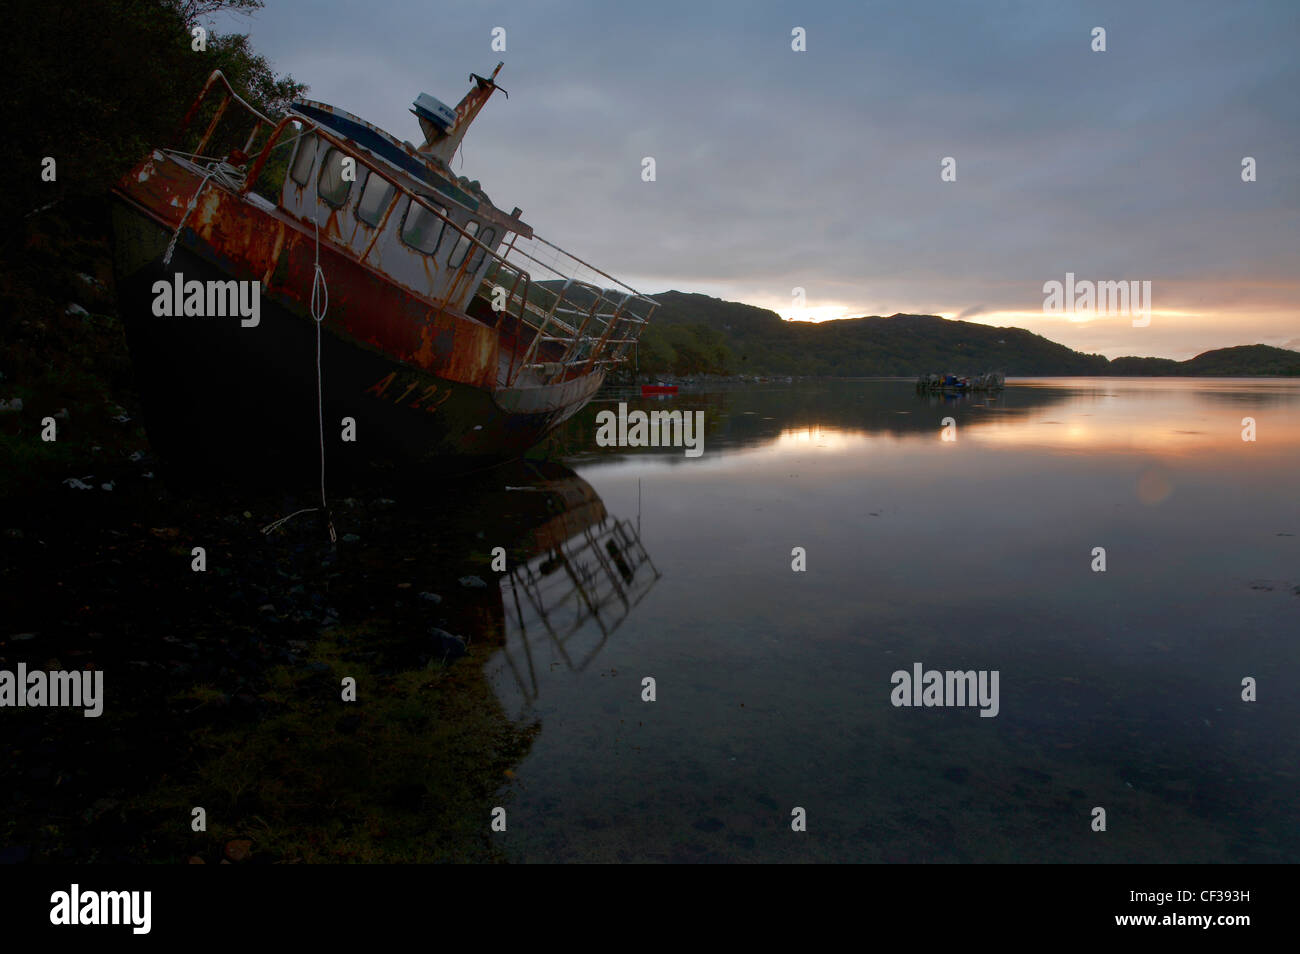 A beached boat at sunset on tranquil Loch Nedd. Stock Photo